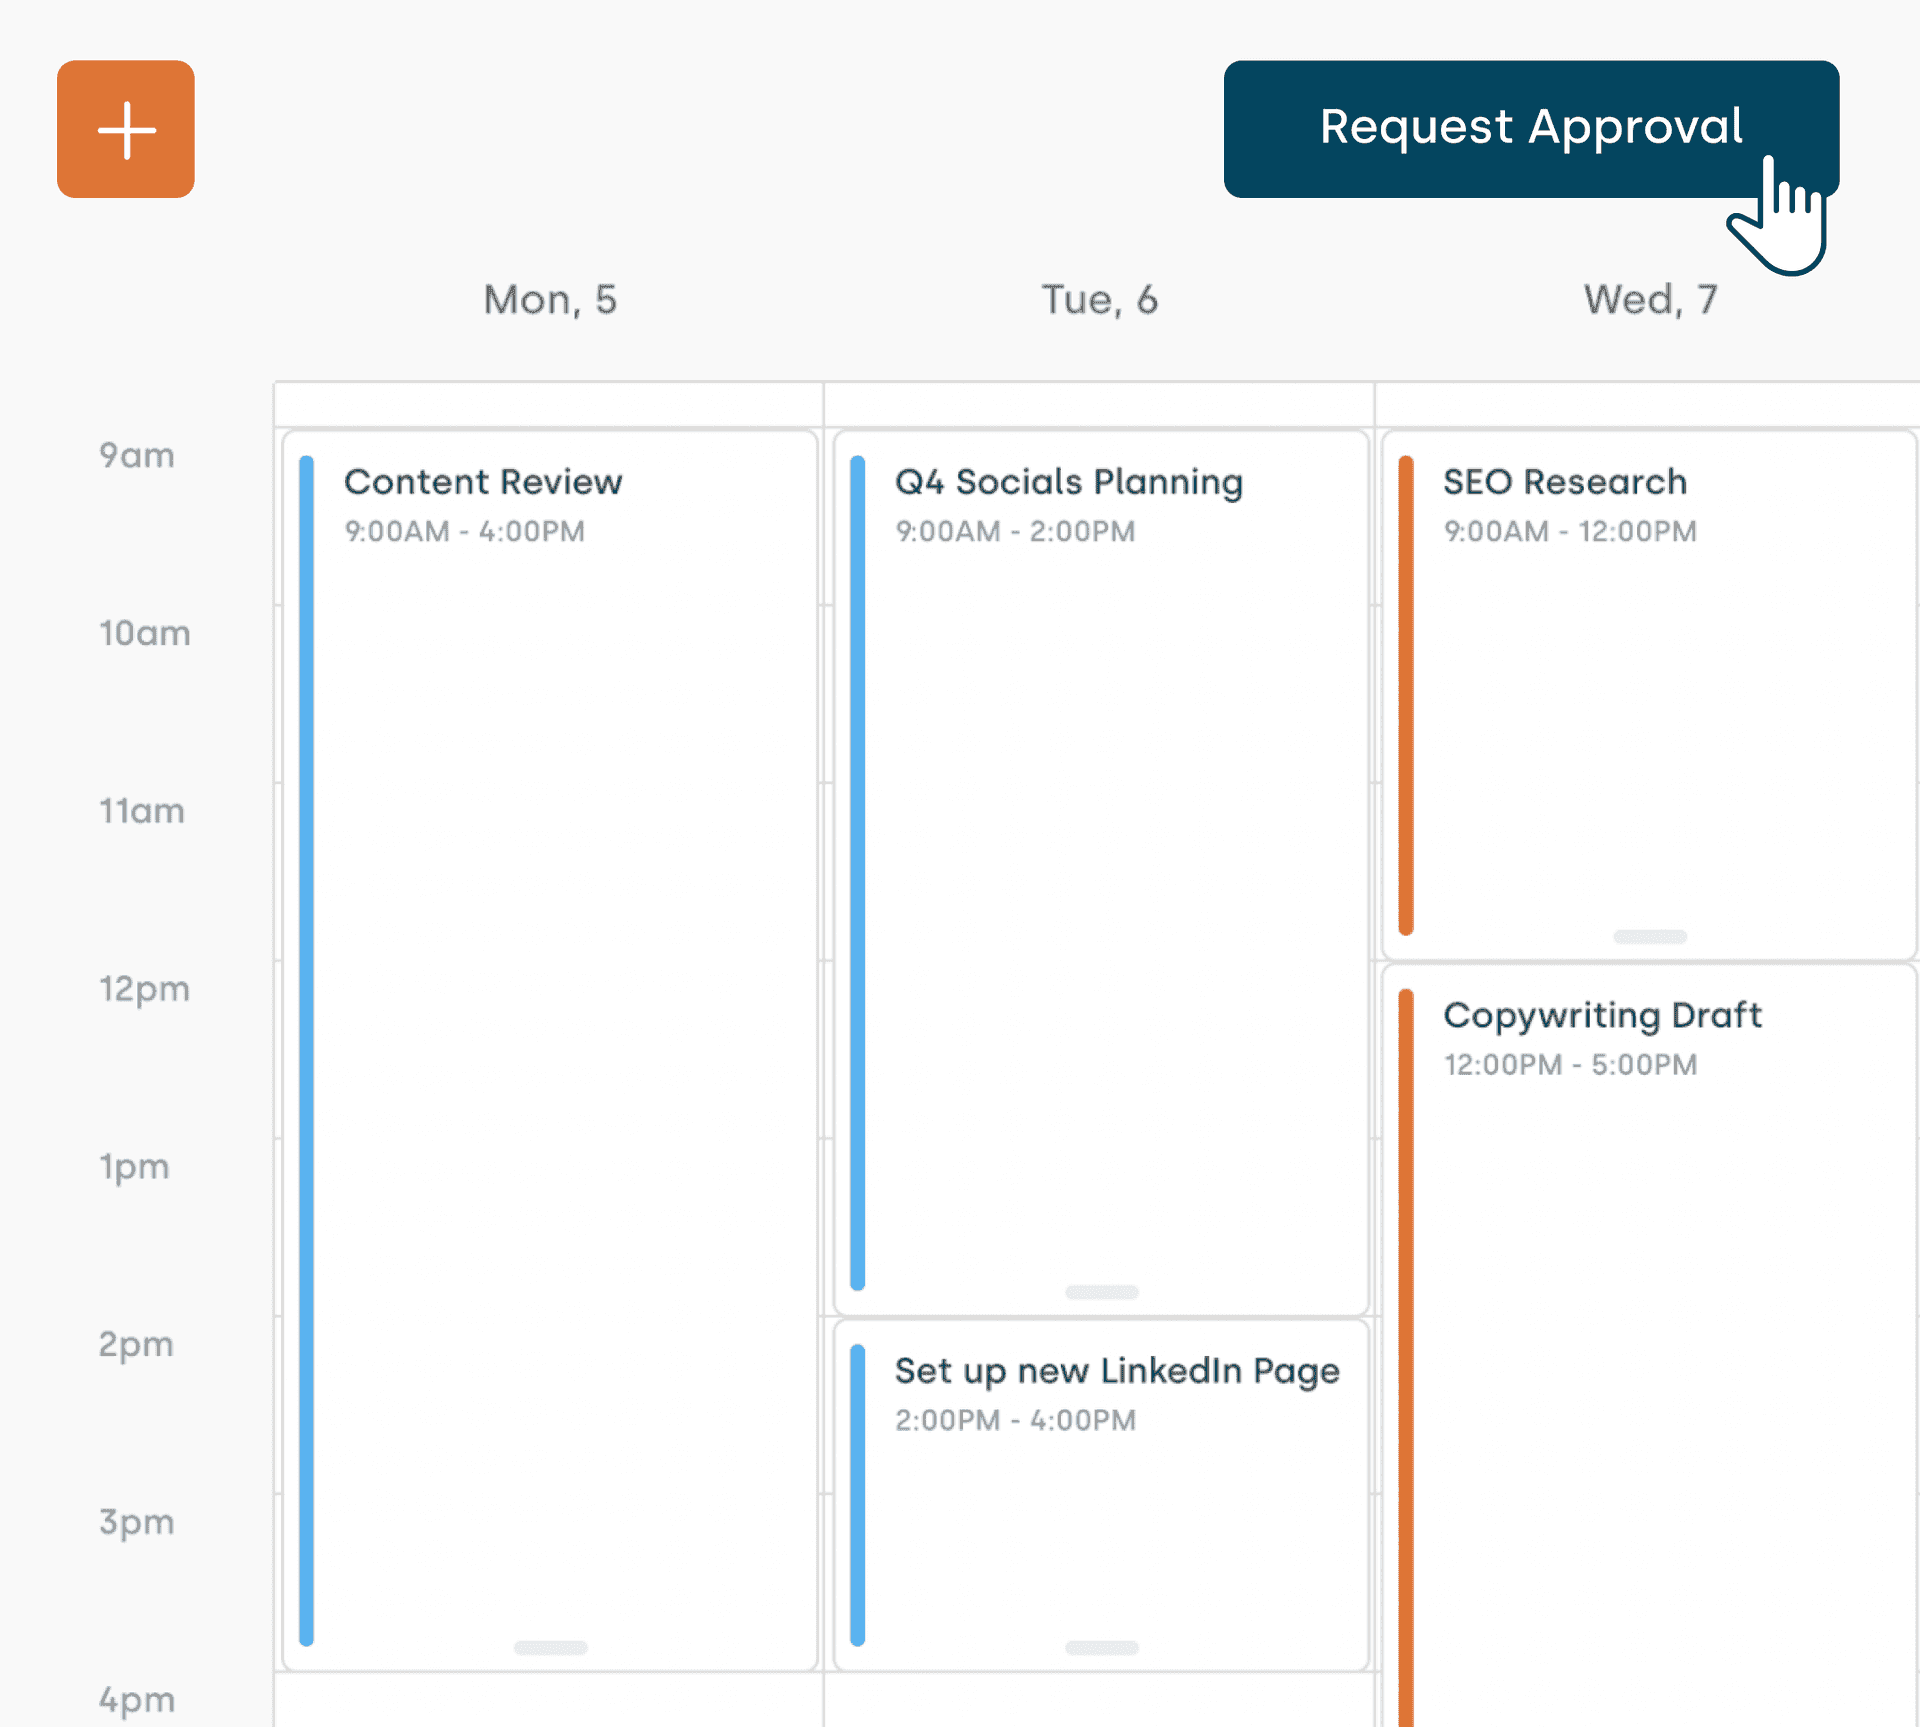 Record your timesheets & request approval